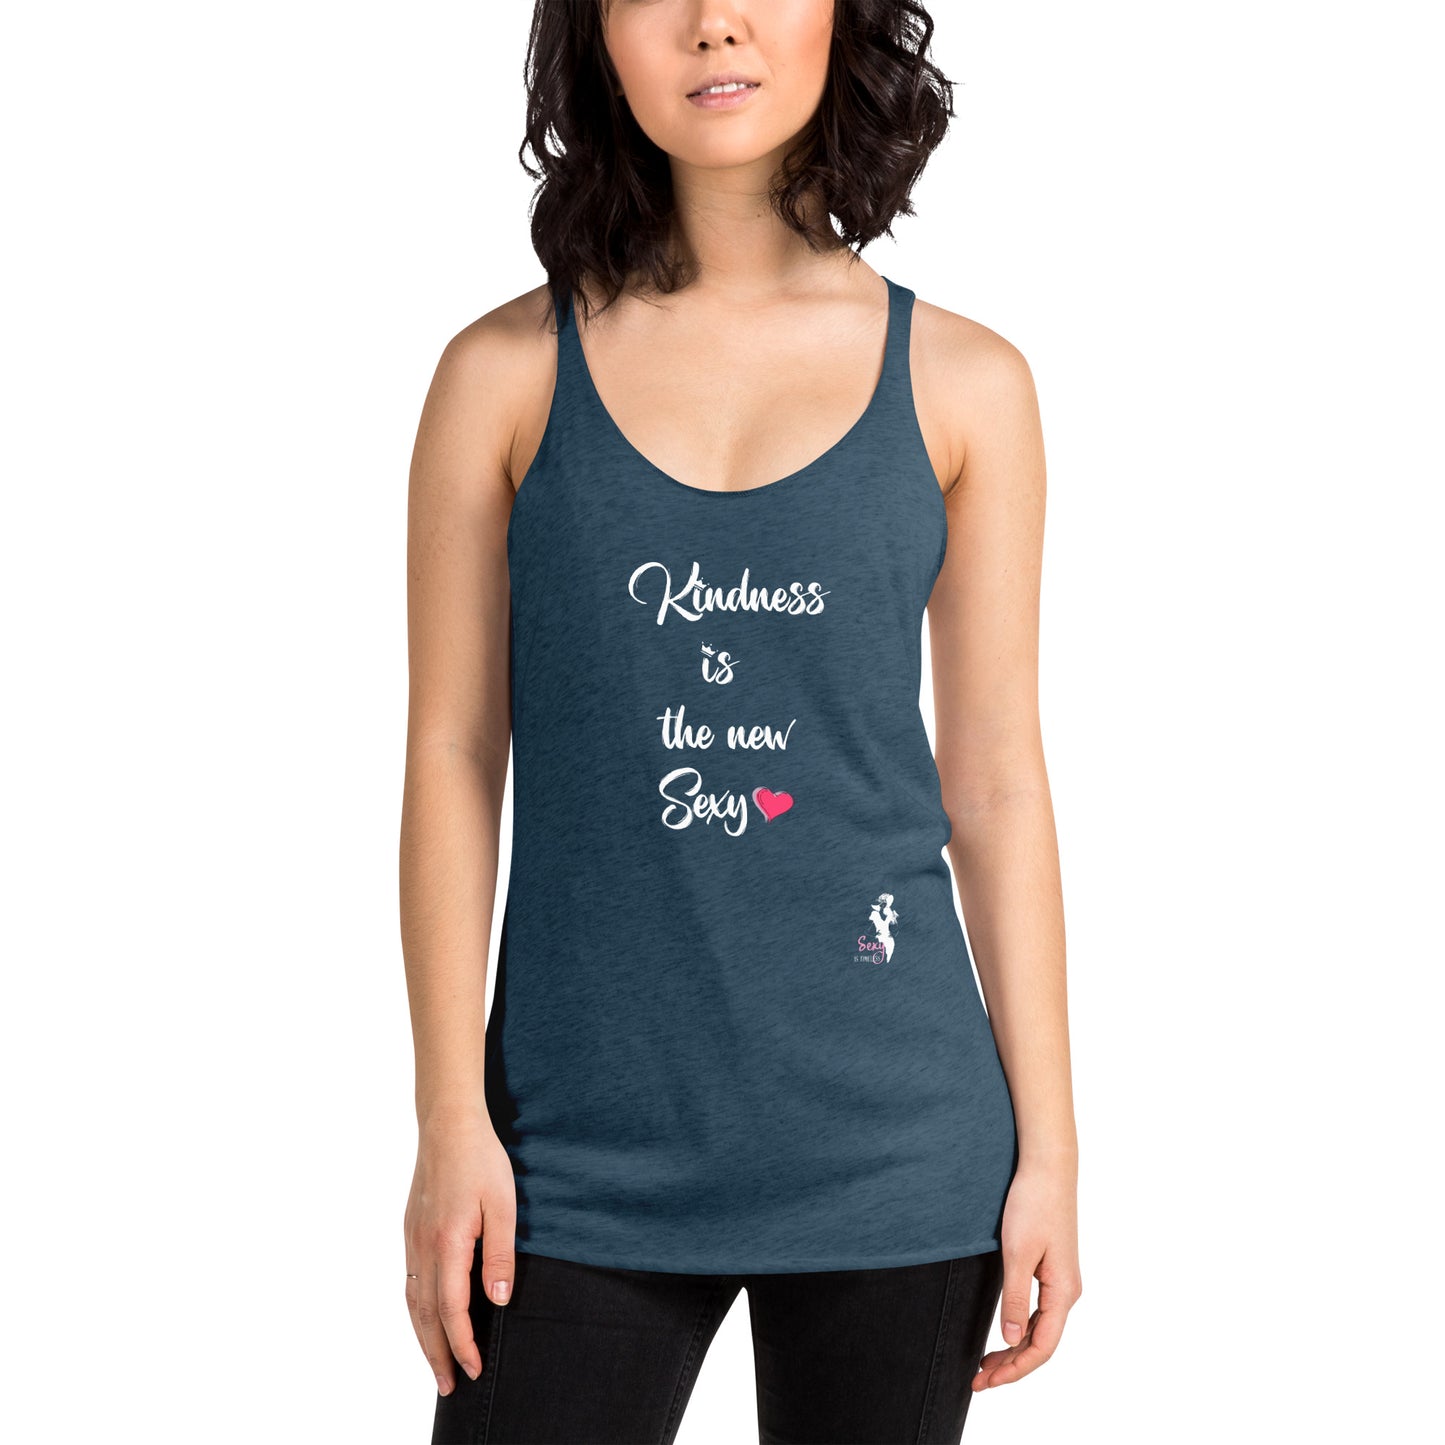 Women's Racerback Tank - Kindness is the new Sexy - Colors